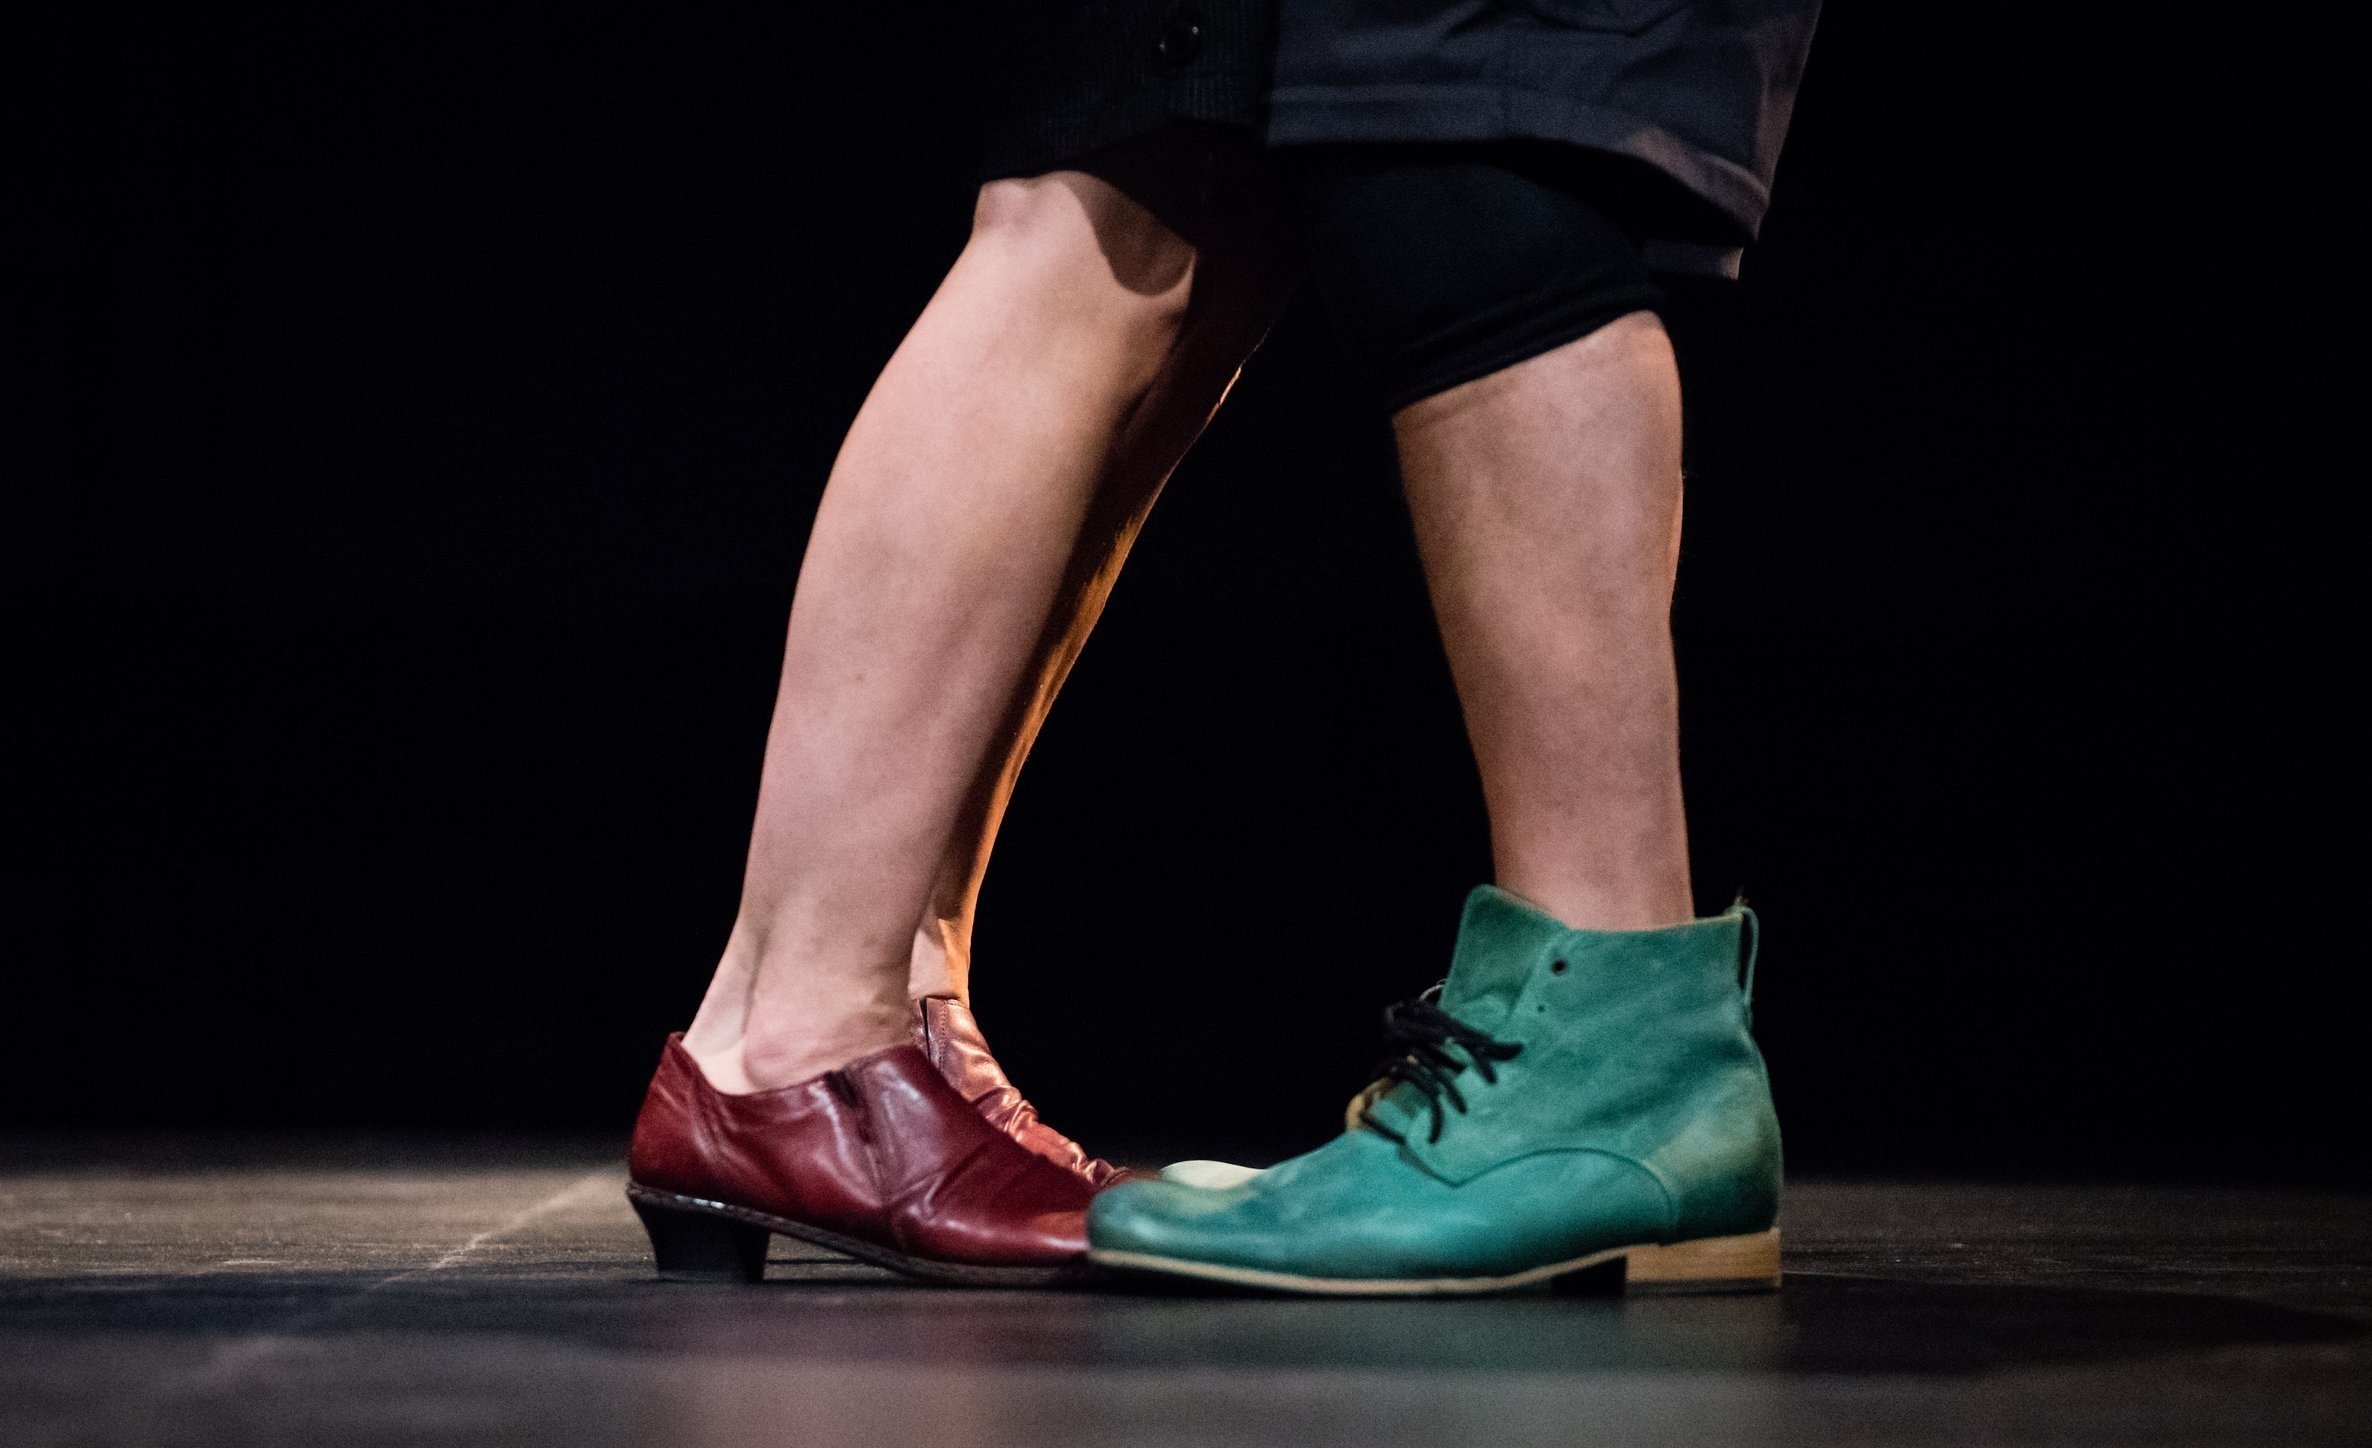 Two pairs of feet, one wearing red shoes and one wearing green shoes, stand toe to toe.